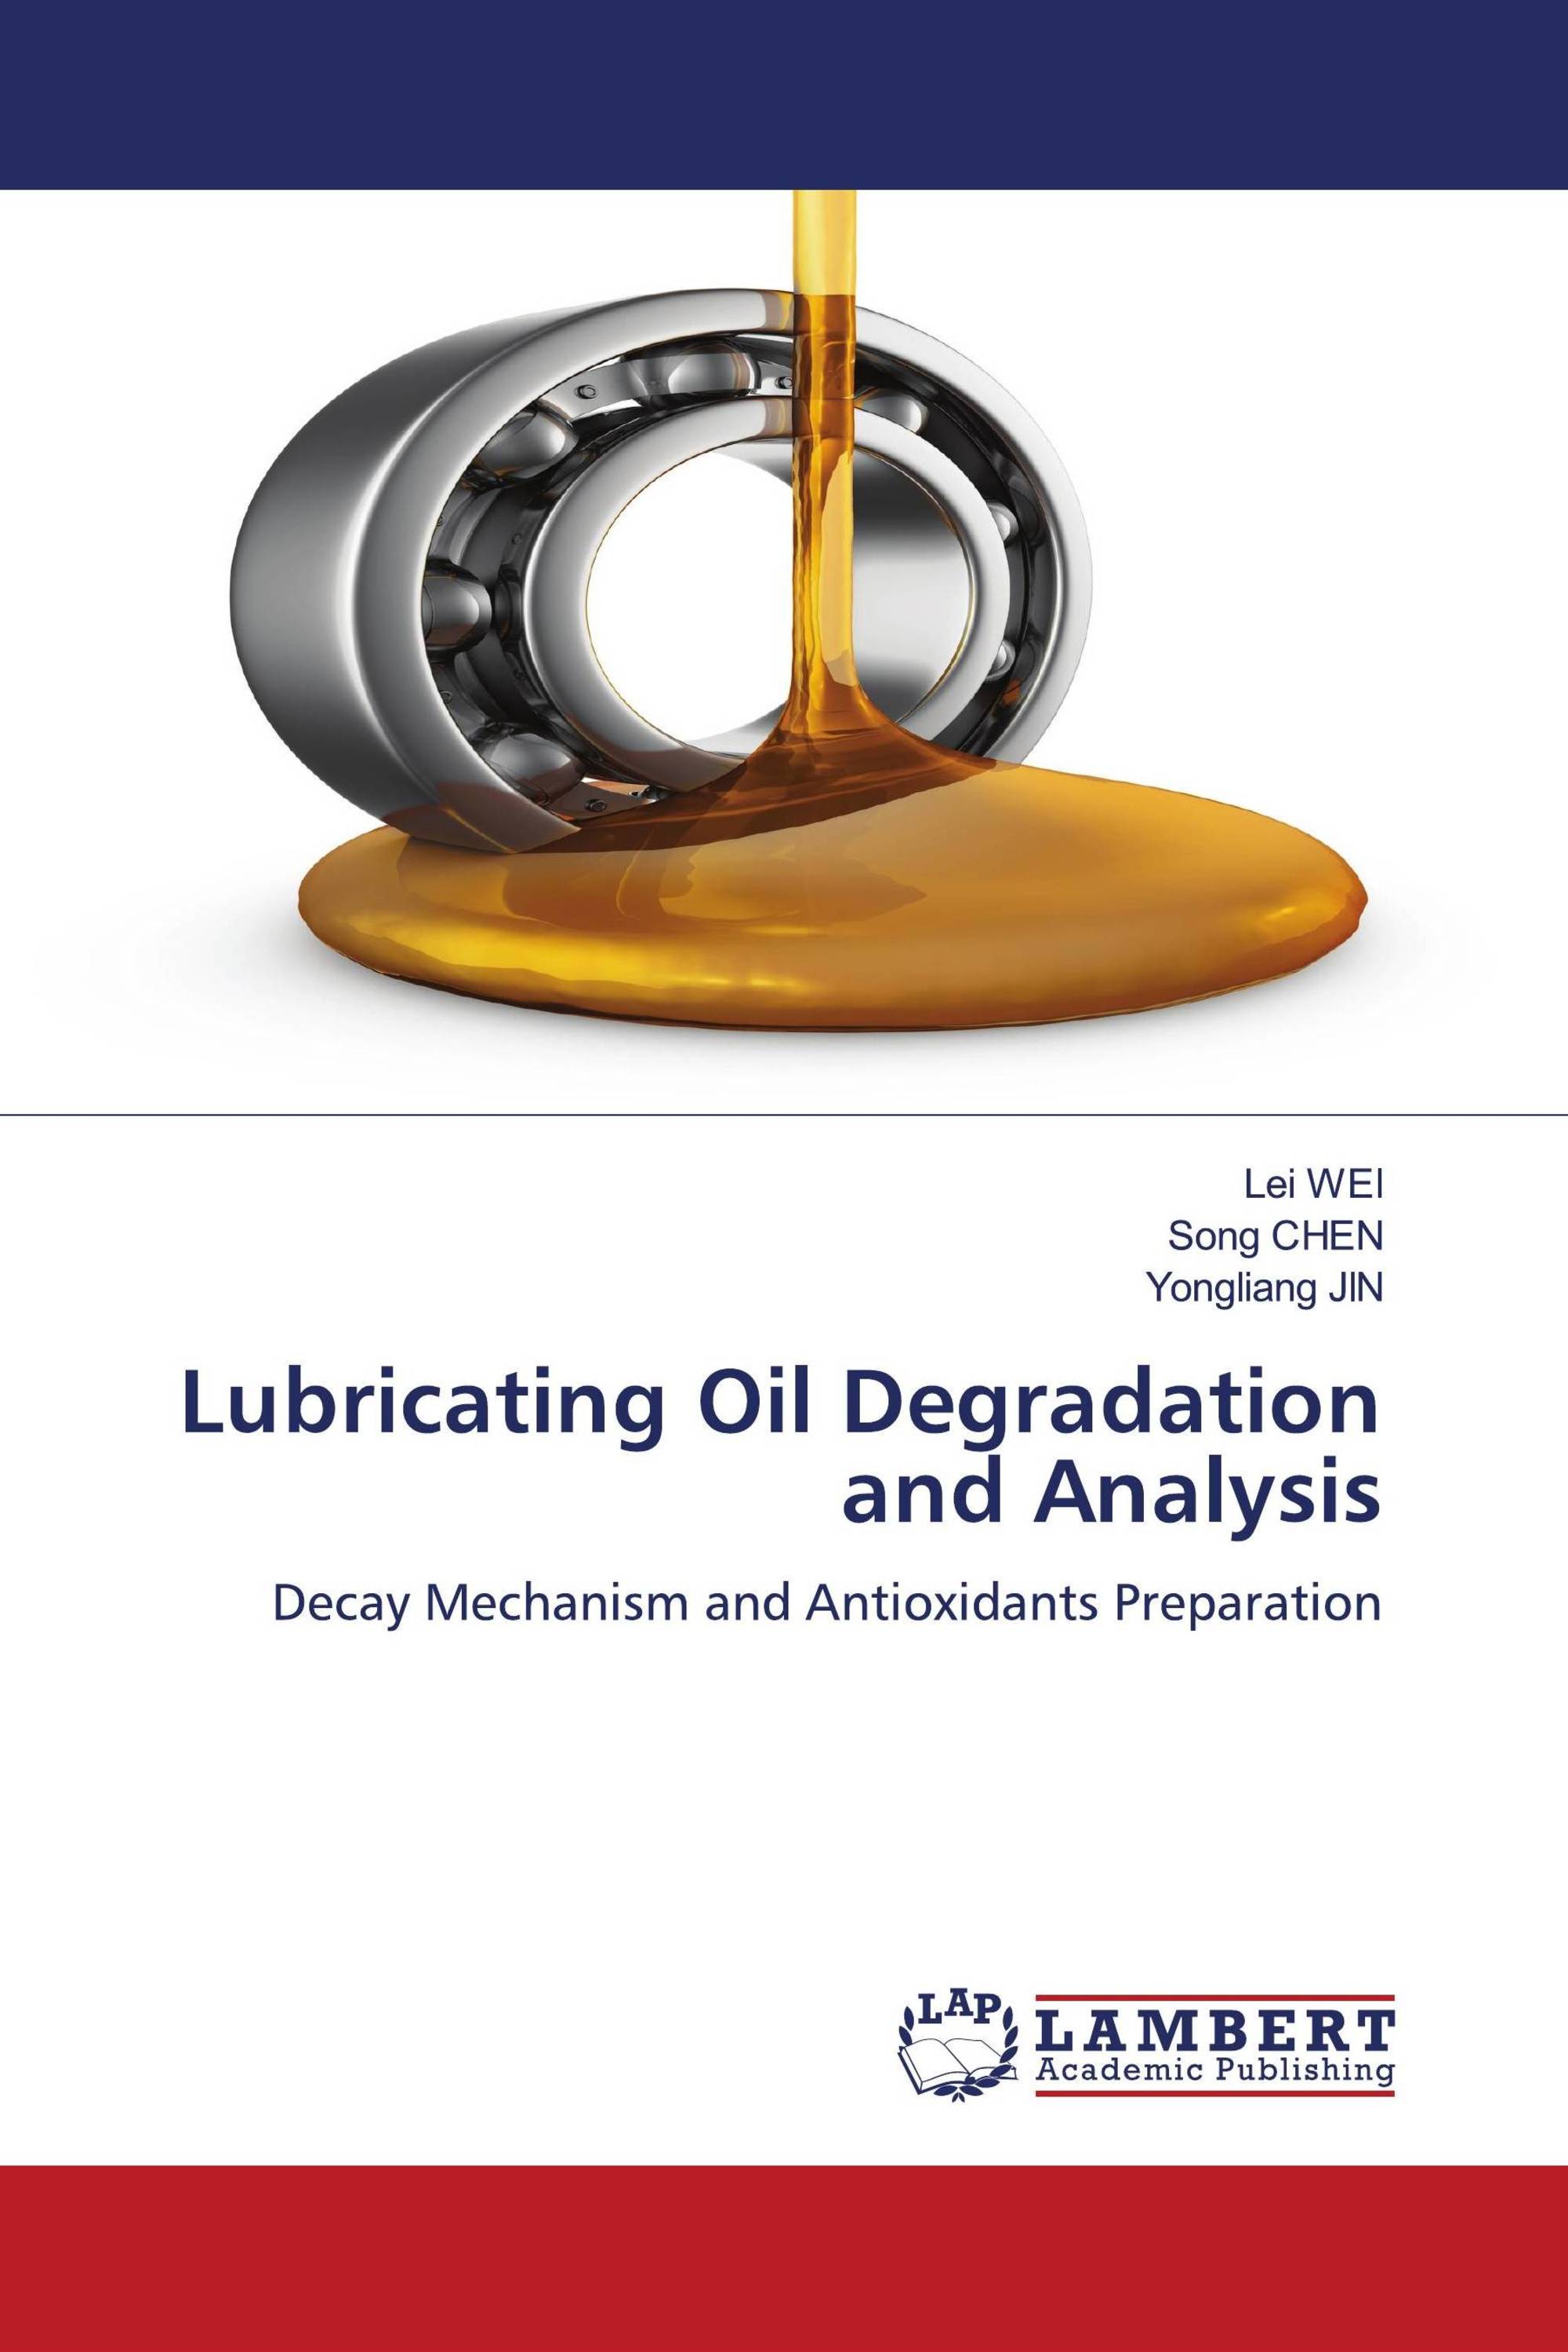 Lubricating Oil Degradation and Analysis